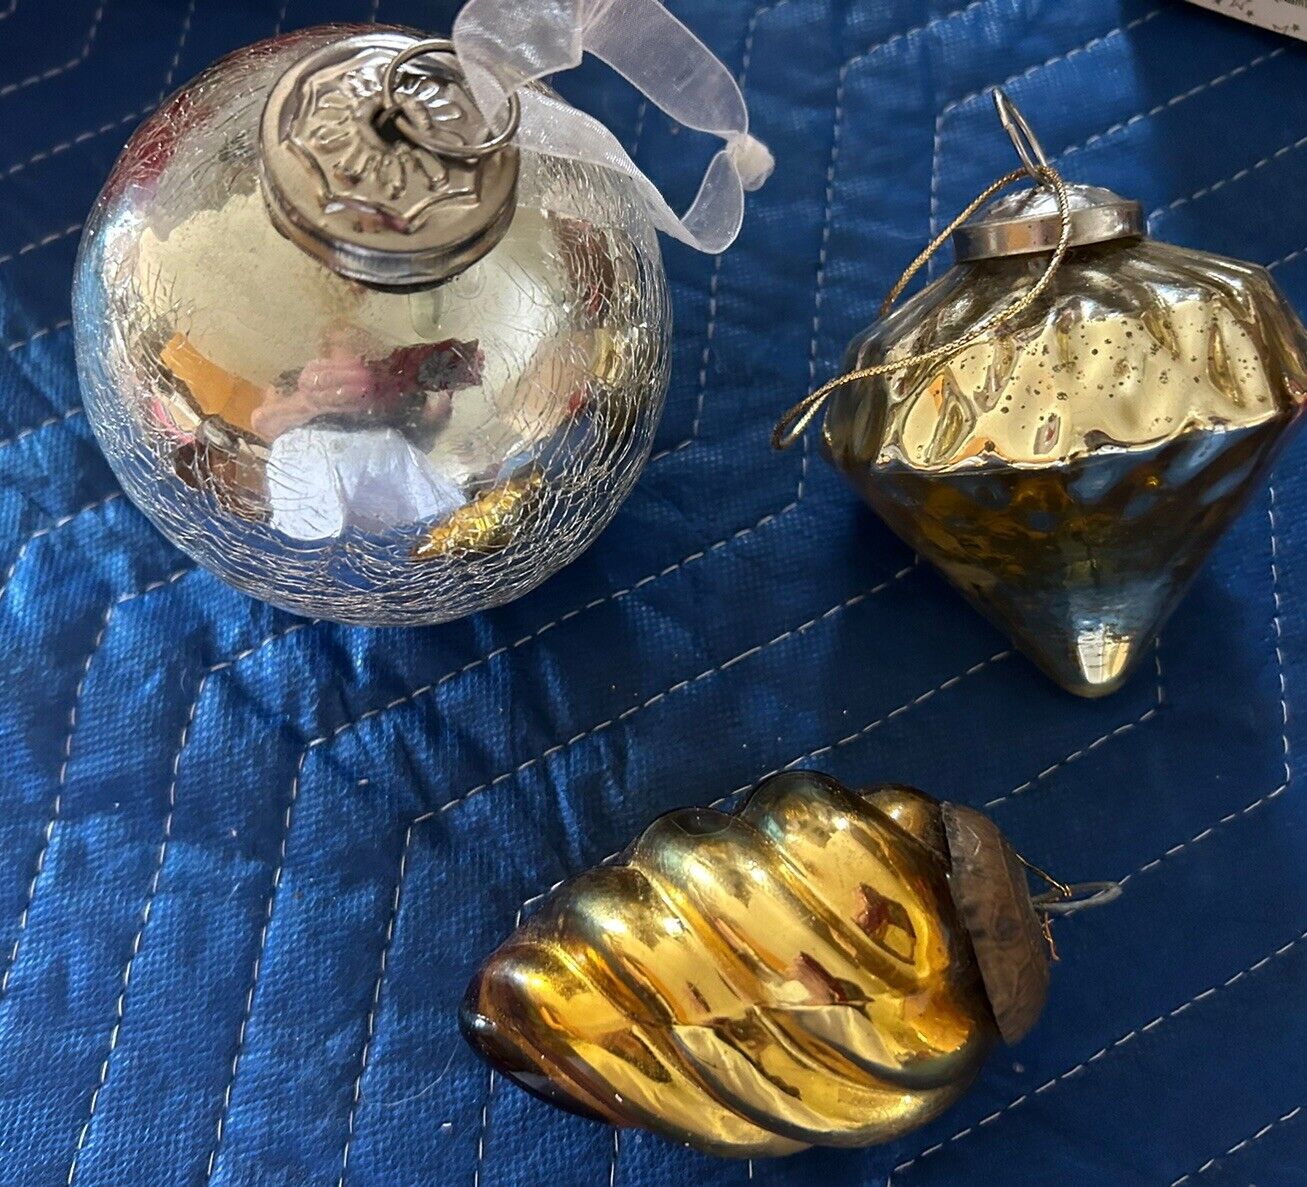 Lot 3 HEAVY GLASS KUGEL STYLE CHRISTMAS ORNAMENTS- 2 Silver And 1 Gold